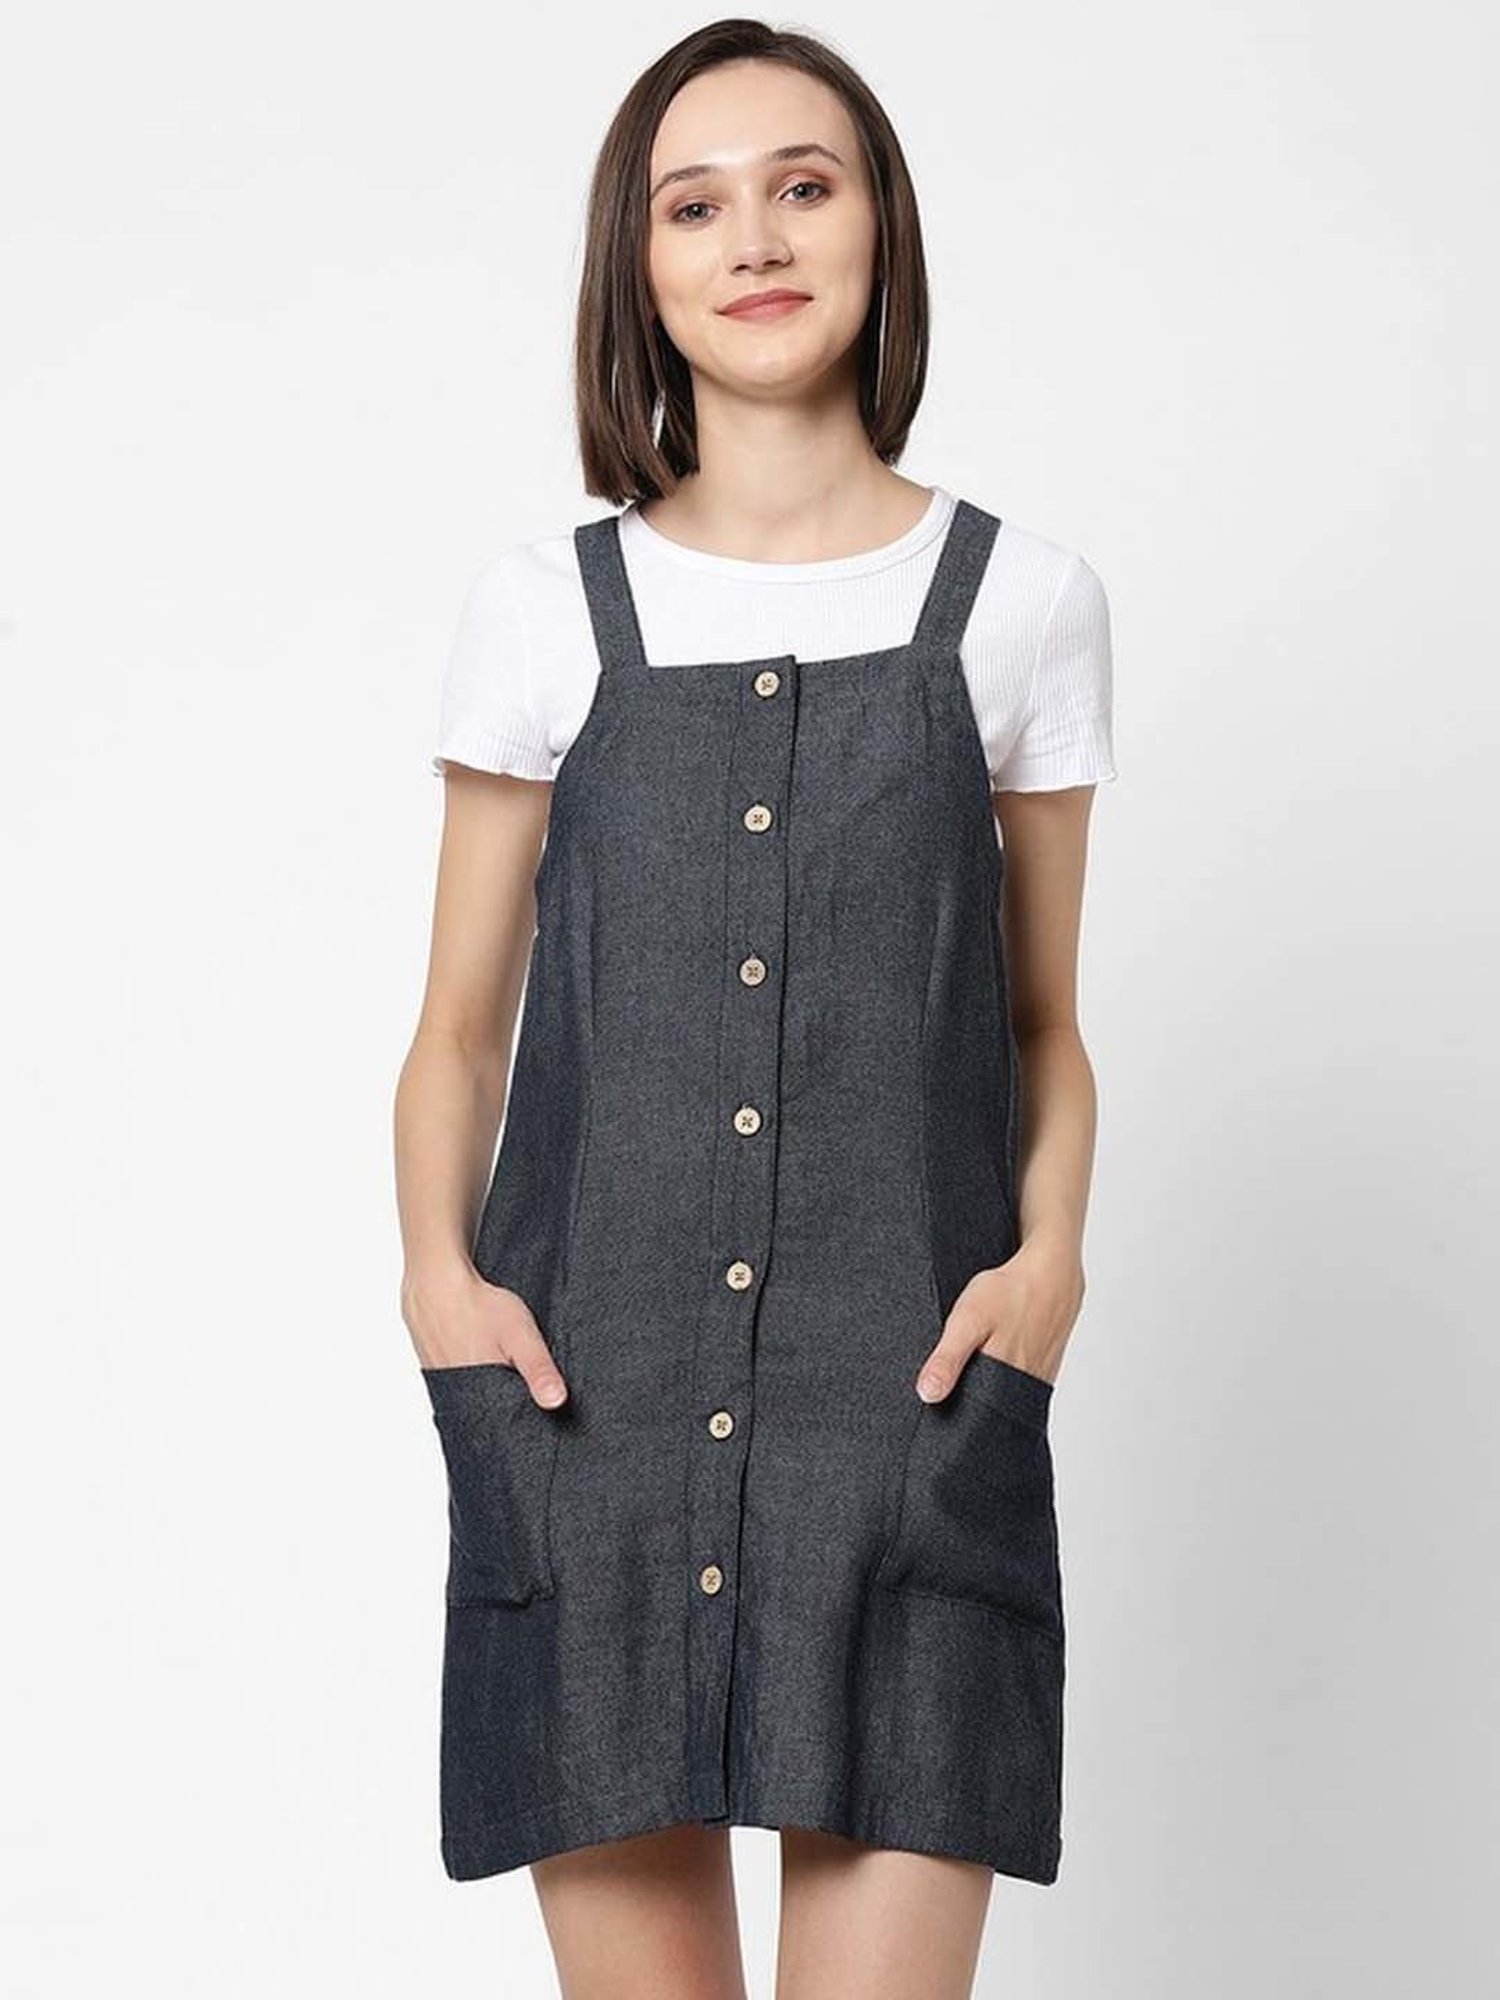 Making rubbish wearable: a Smith Pinafore from upcycled denim - The Craft  of Clothes